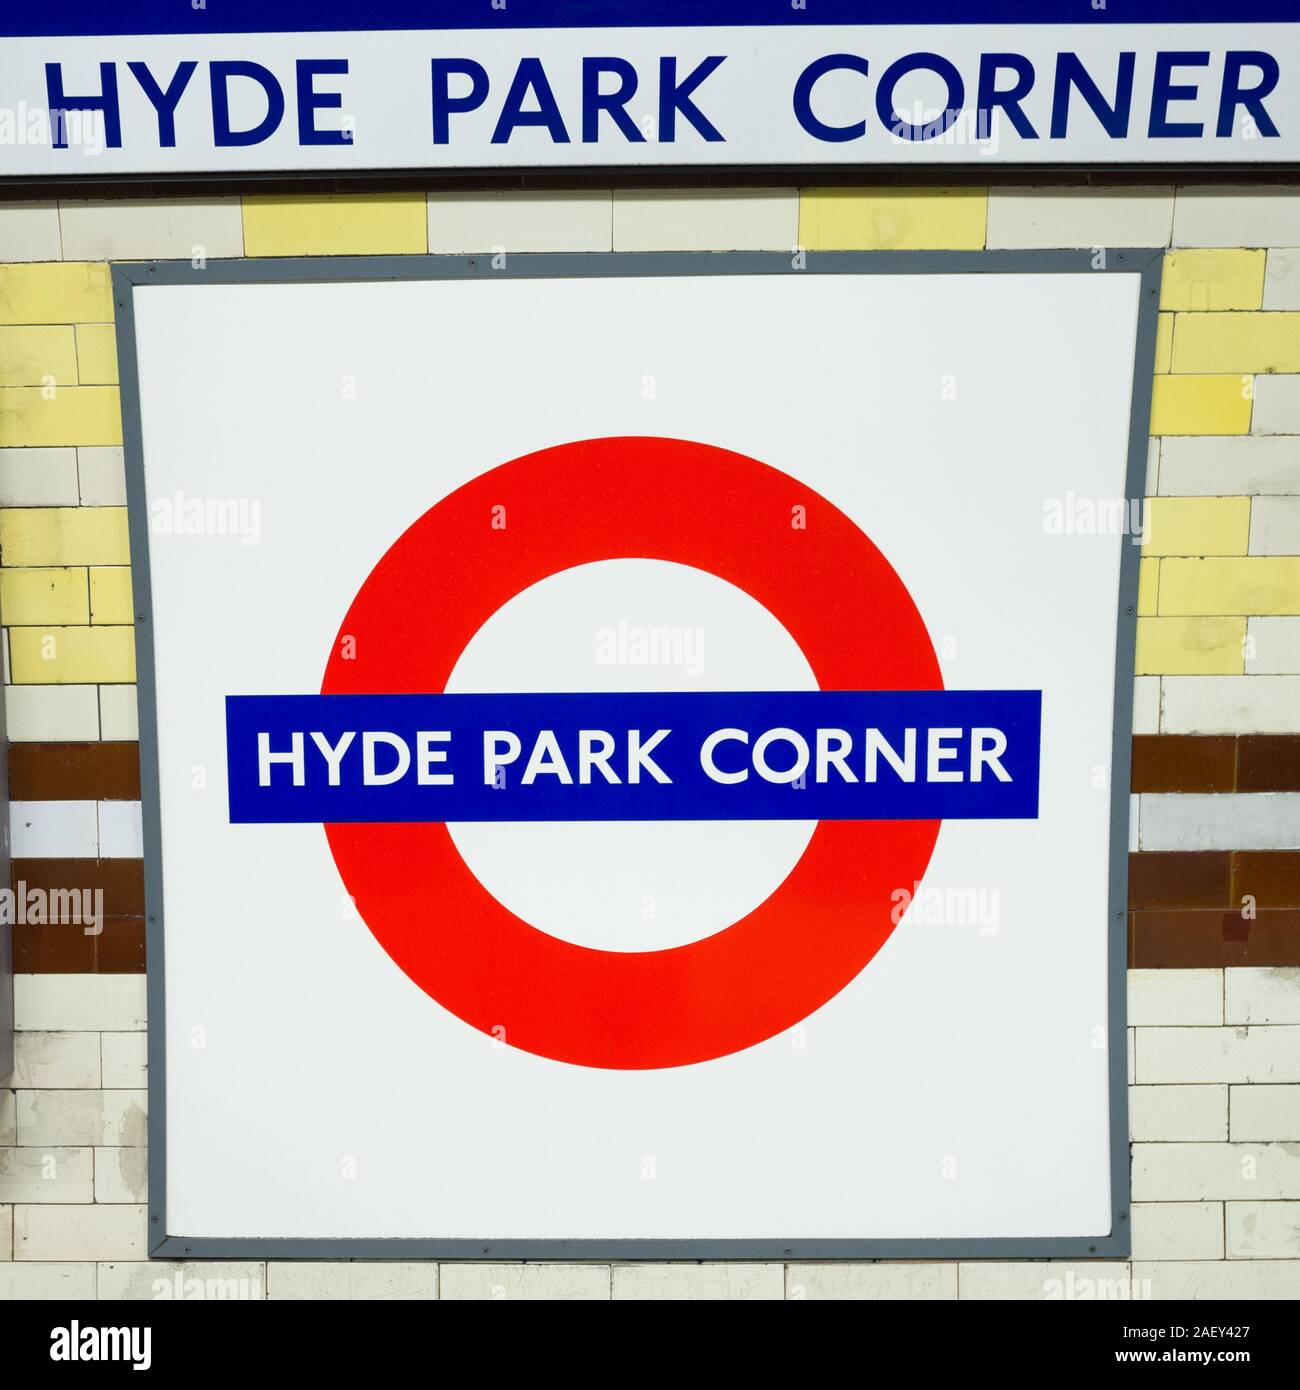 Hyde Park Corner tube station. A platform sign for the London Underground station on the Piccadilly Line serving Hyde Park, Oxford Street and Mayfair. Stock Photo